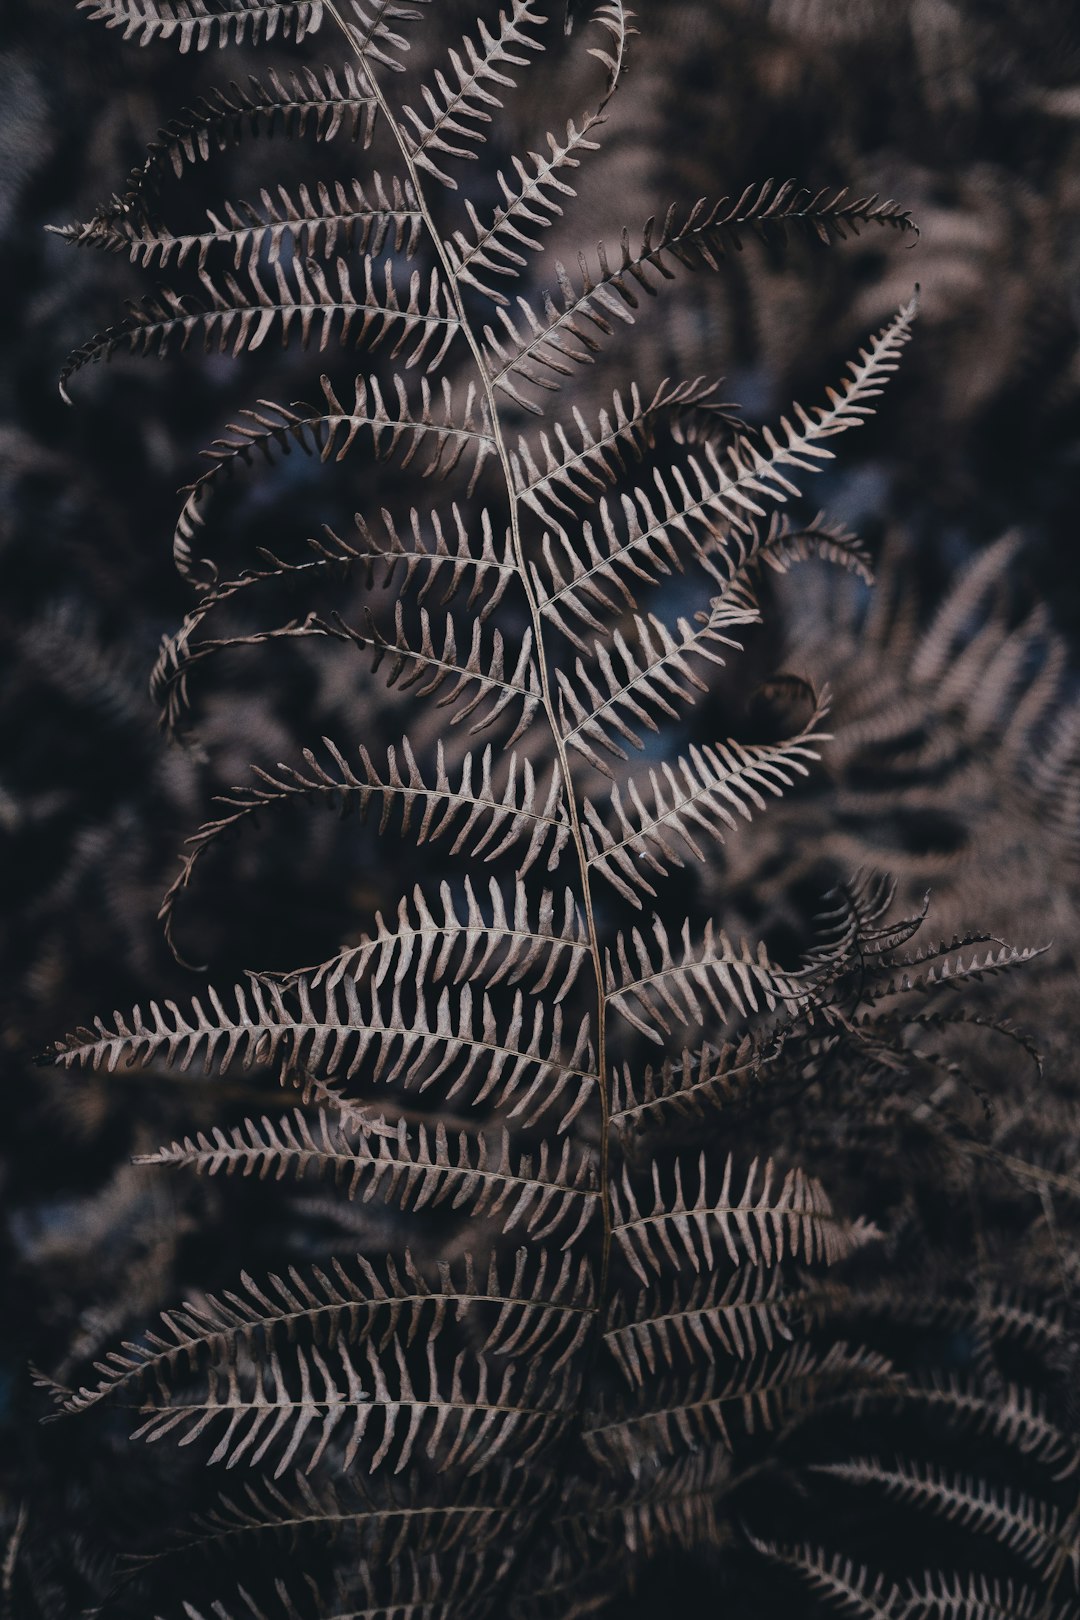 Taken on a weekend walk in the forest - I think I prefer ferns when they go past their prime, those golden tones!